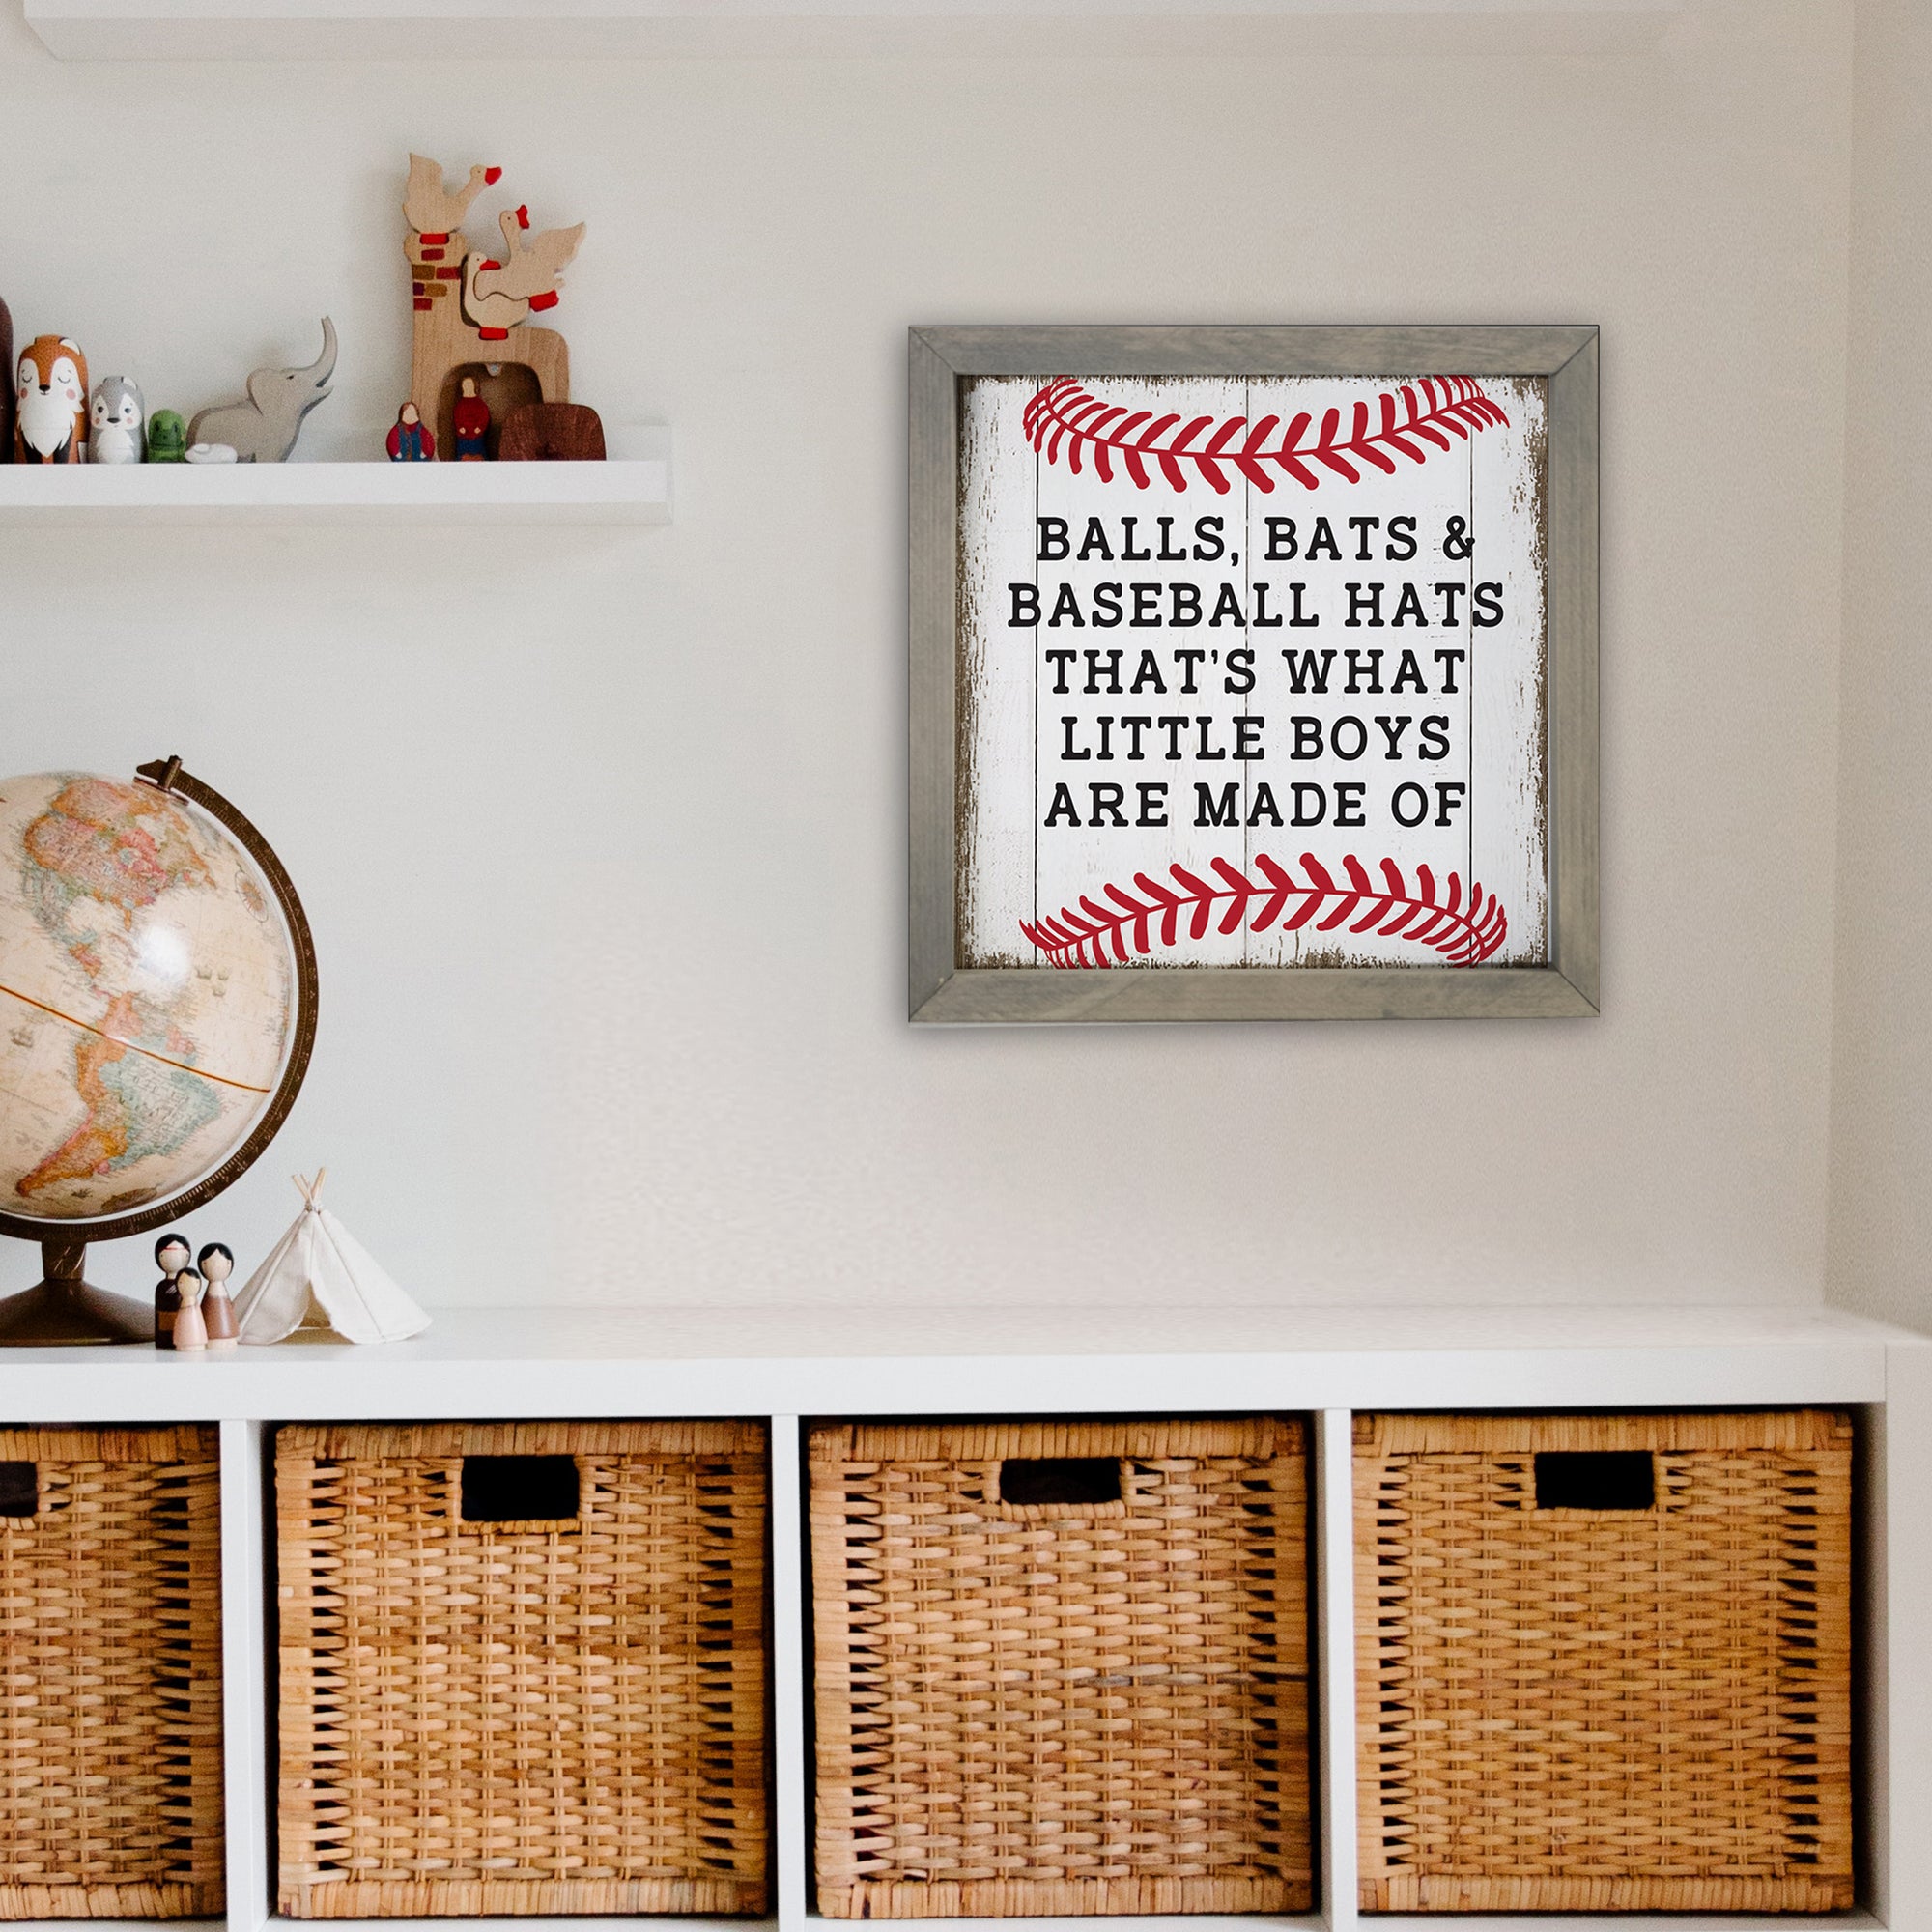 Elevate your living space with our elegant baseball framed shadow box shelf décor